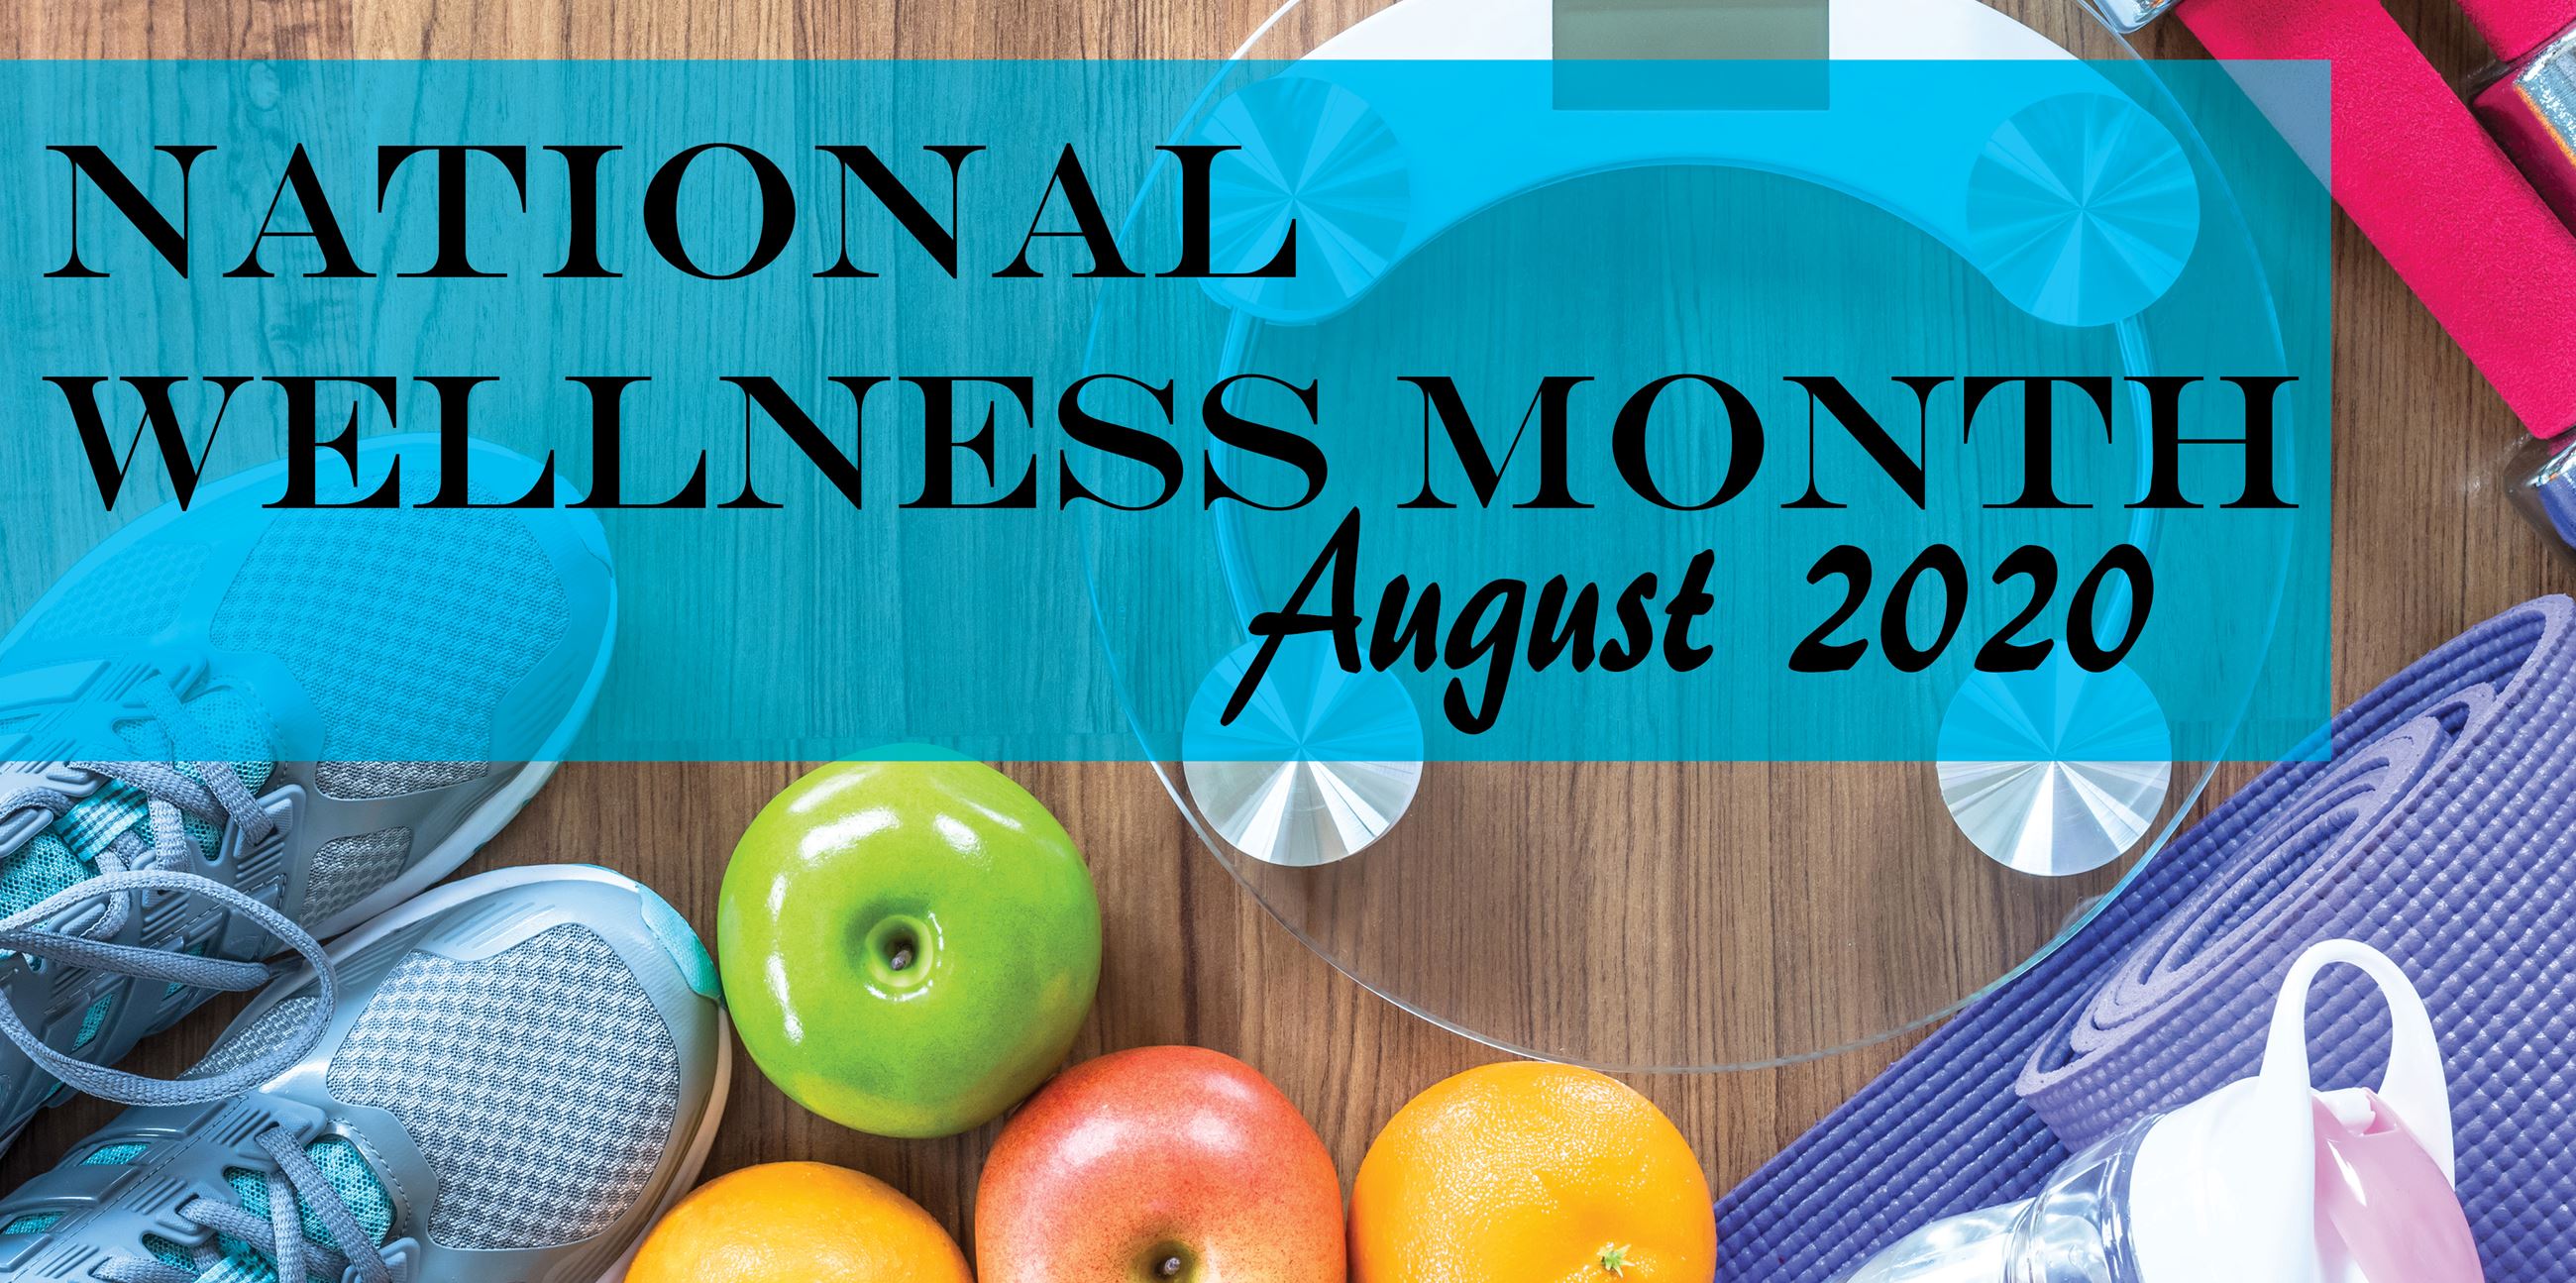 august-is-national-wellness-month-jackson-county-mo